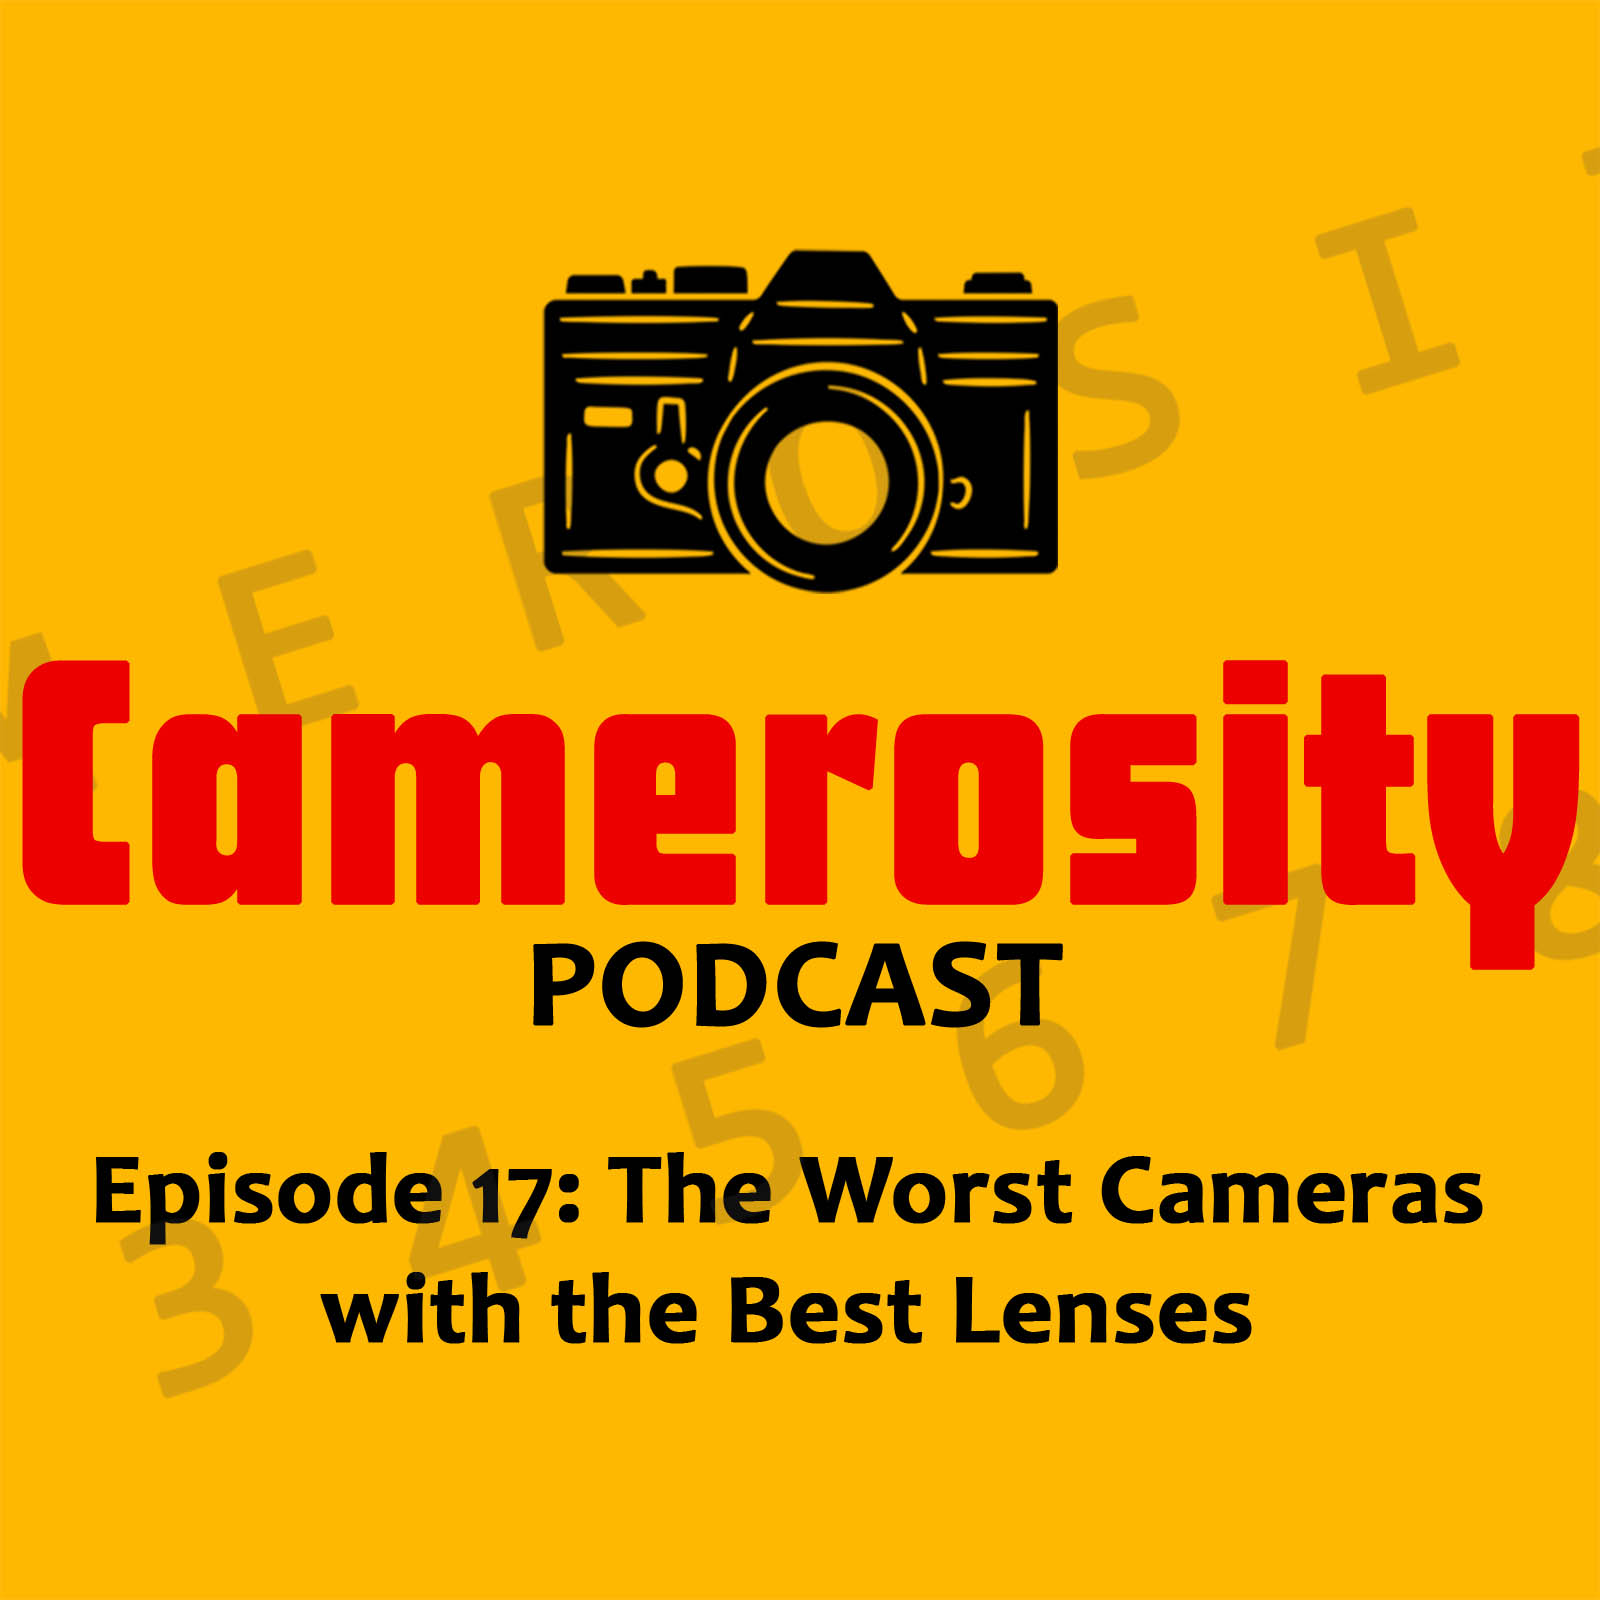 Episode 17: The Worst Cameras with the Best Lenses